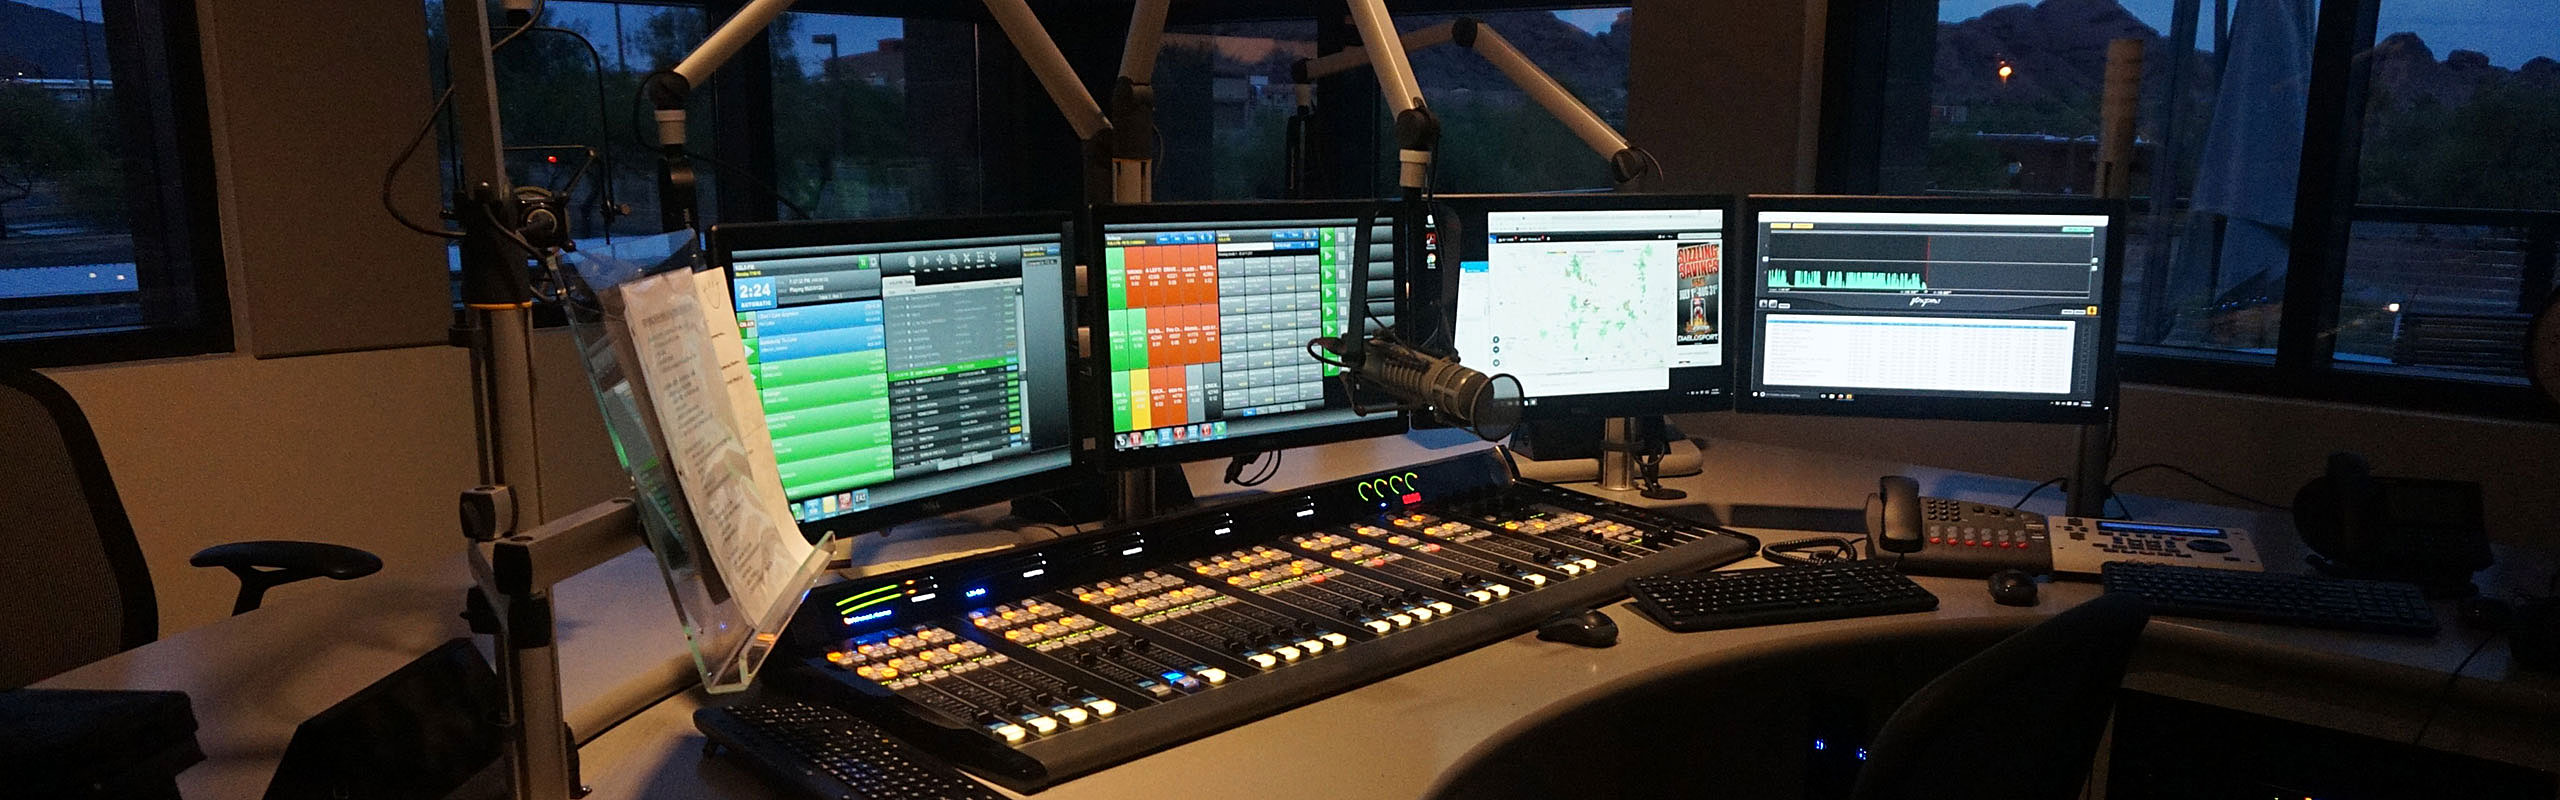 OVERVIEW: Radio Consoles, Networking, Software, Processing